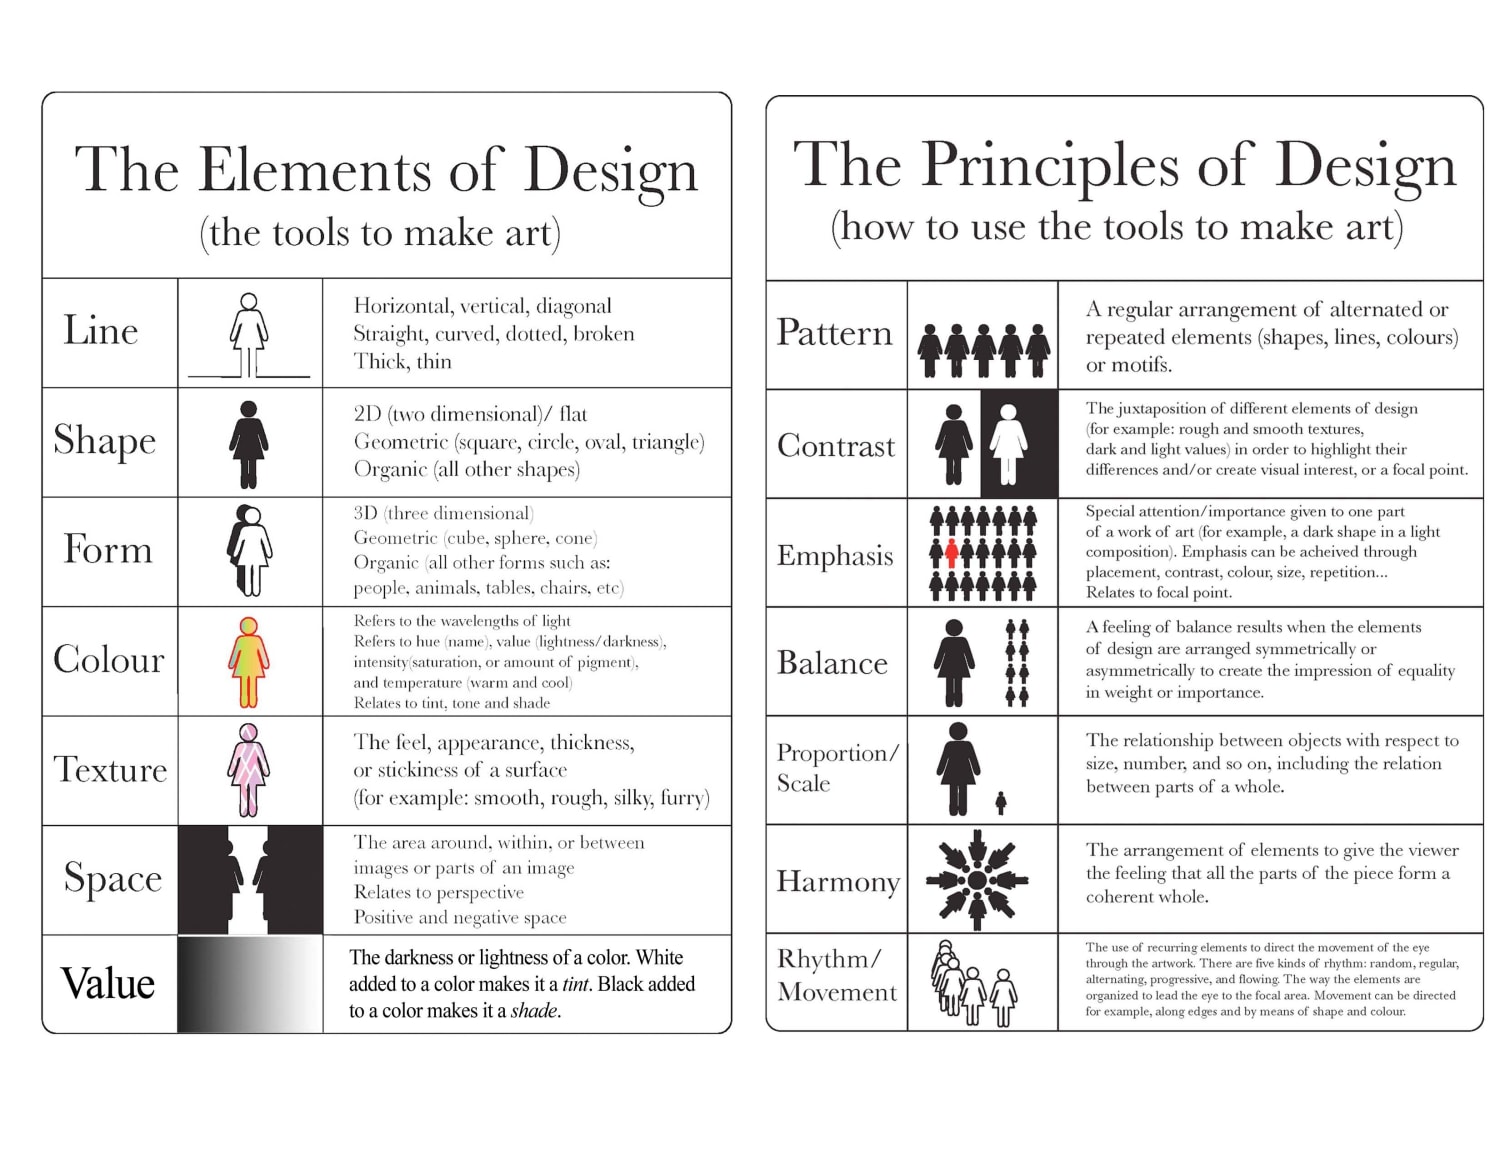 Elements and Principles of Design by Patrick Butler